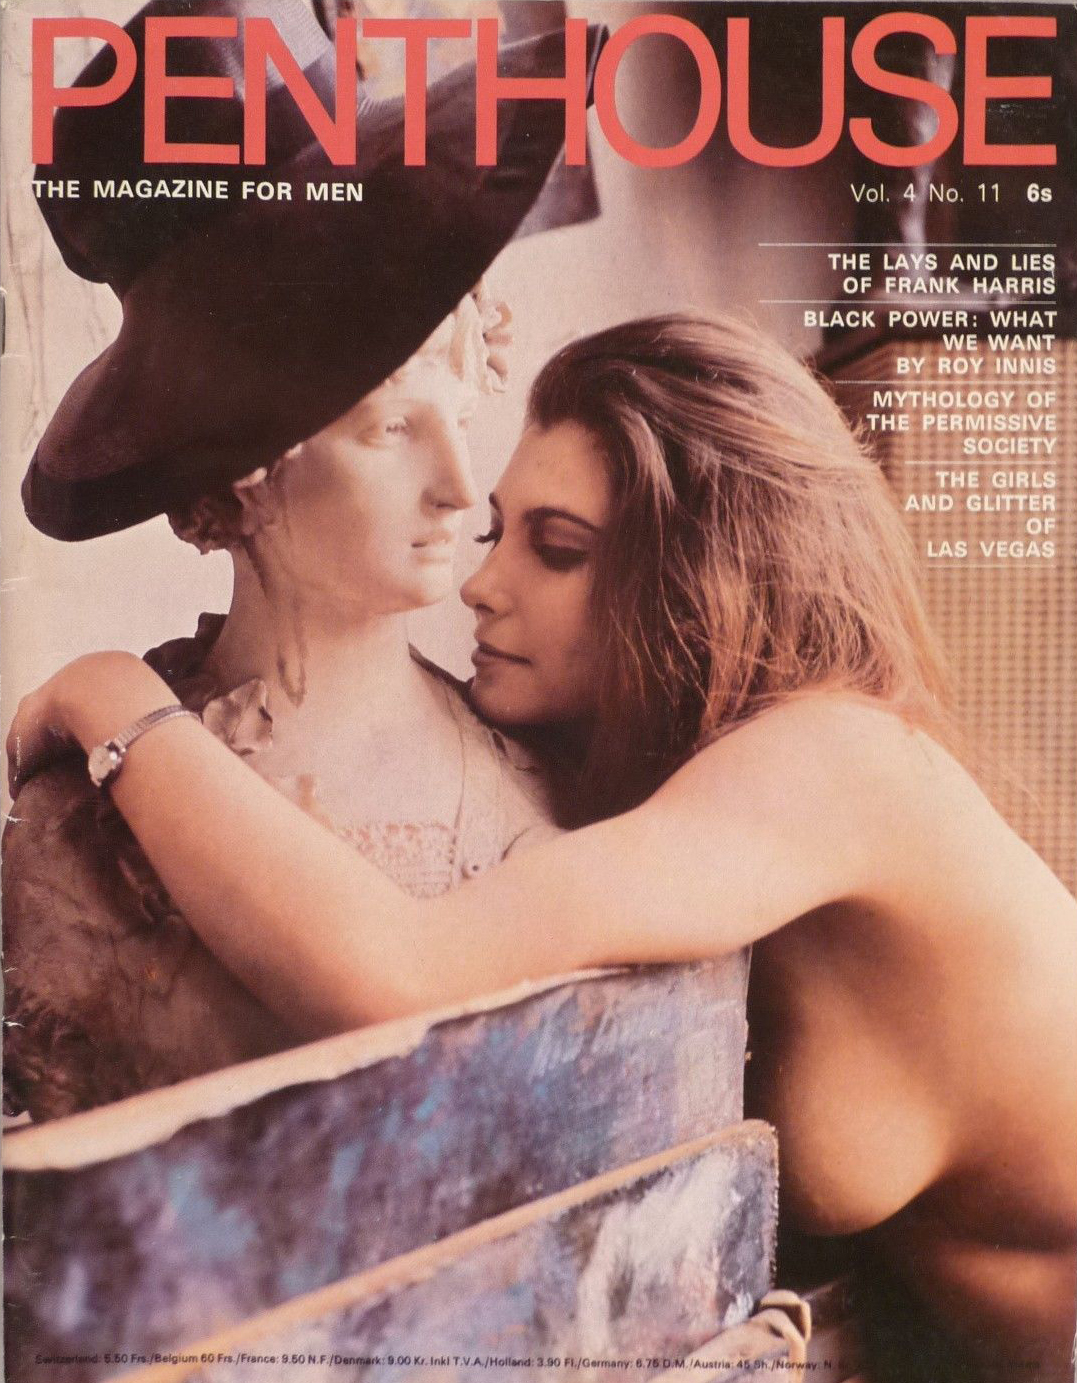 Penthouse UK Vol. 4 # 11 magazine back issue Penthouse UK magizine back copy Penthouse UK Vol. 4 # 11 Magazine Back Issue Published by Penthouse Publishing, Bob Guccione. The Lays And Lies Of Frank Harris.